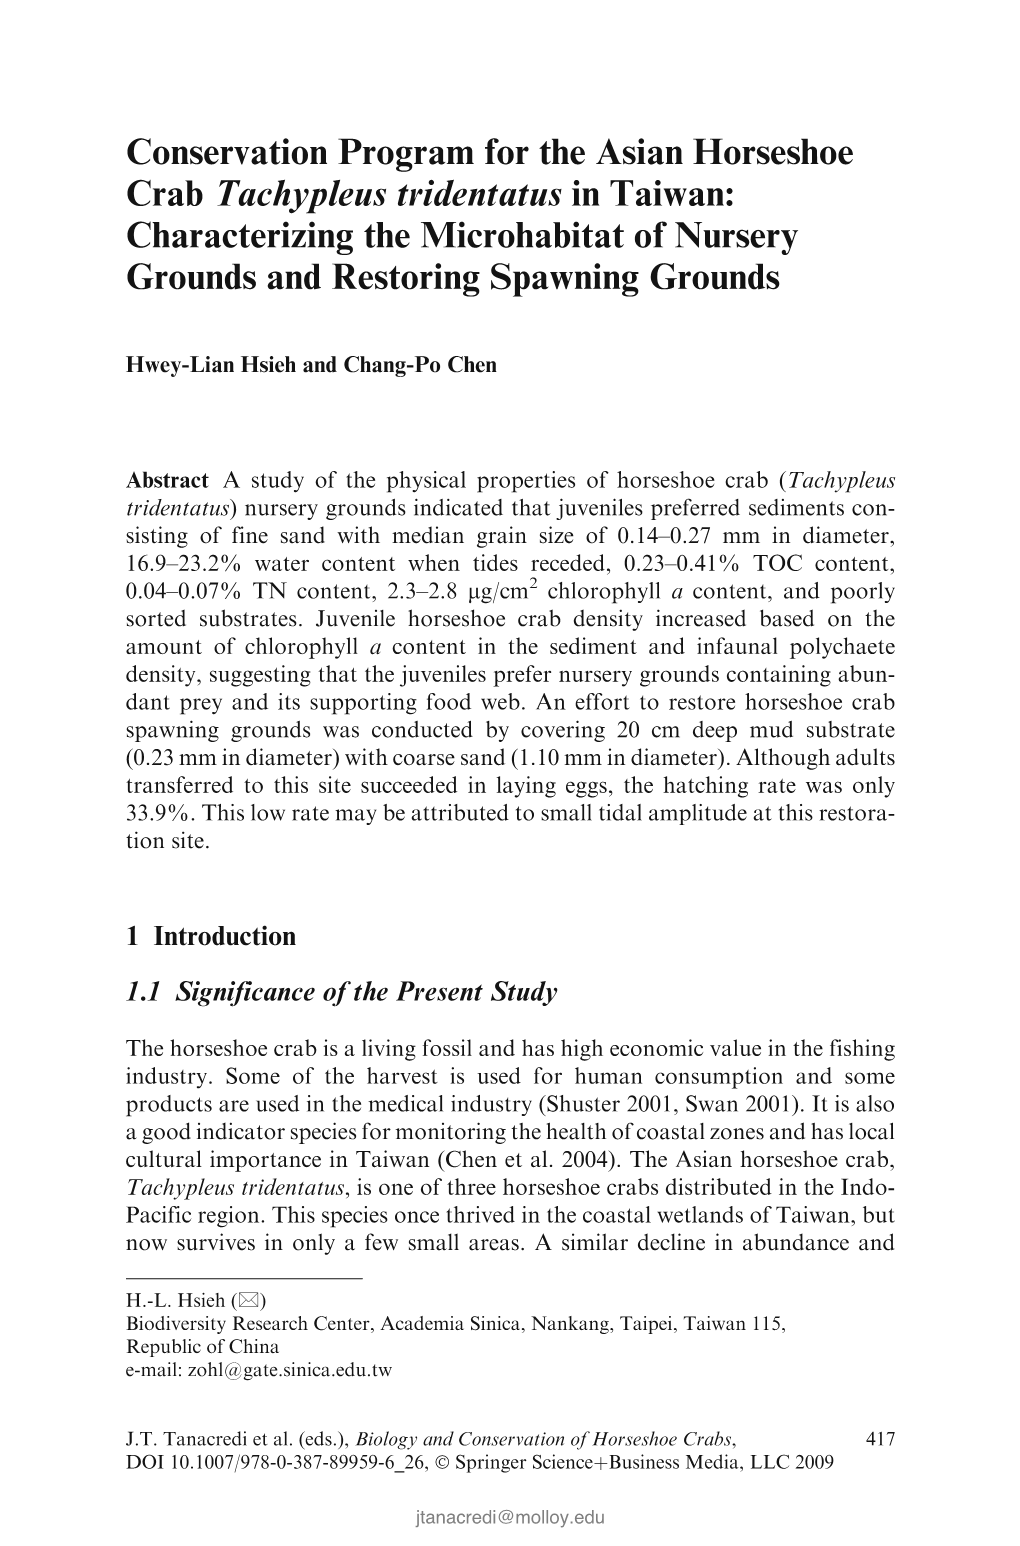 Conservation Program for the Asian Horseshoe Crab Tachypleus Tridentatus in Taiwan: Characterizing the Microhabitat of Nursery Grounds and Restoring Spawning Grounds